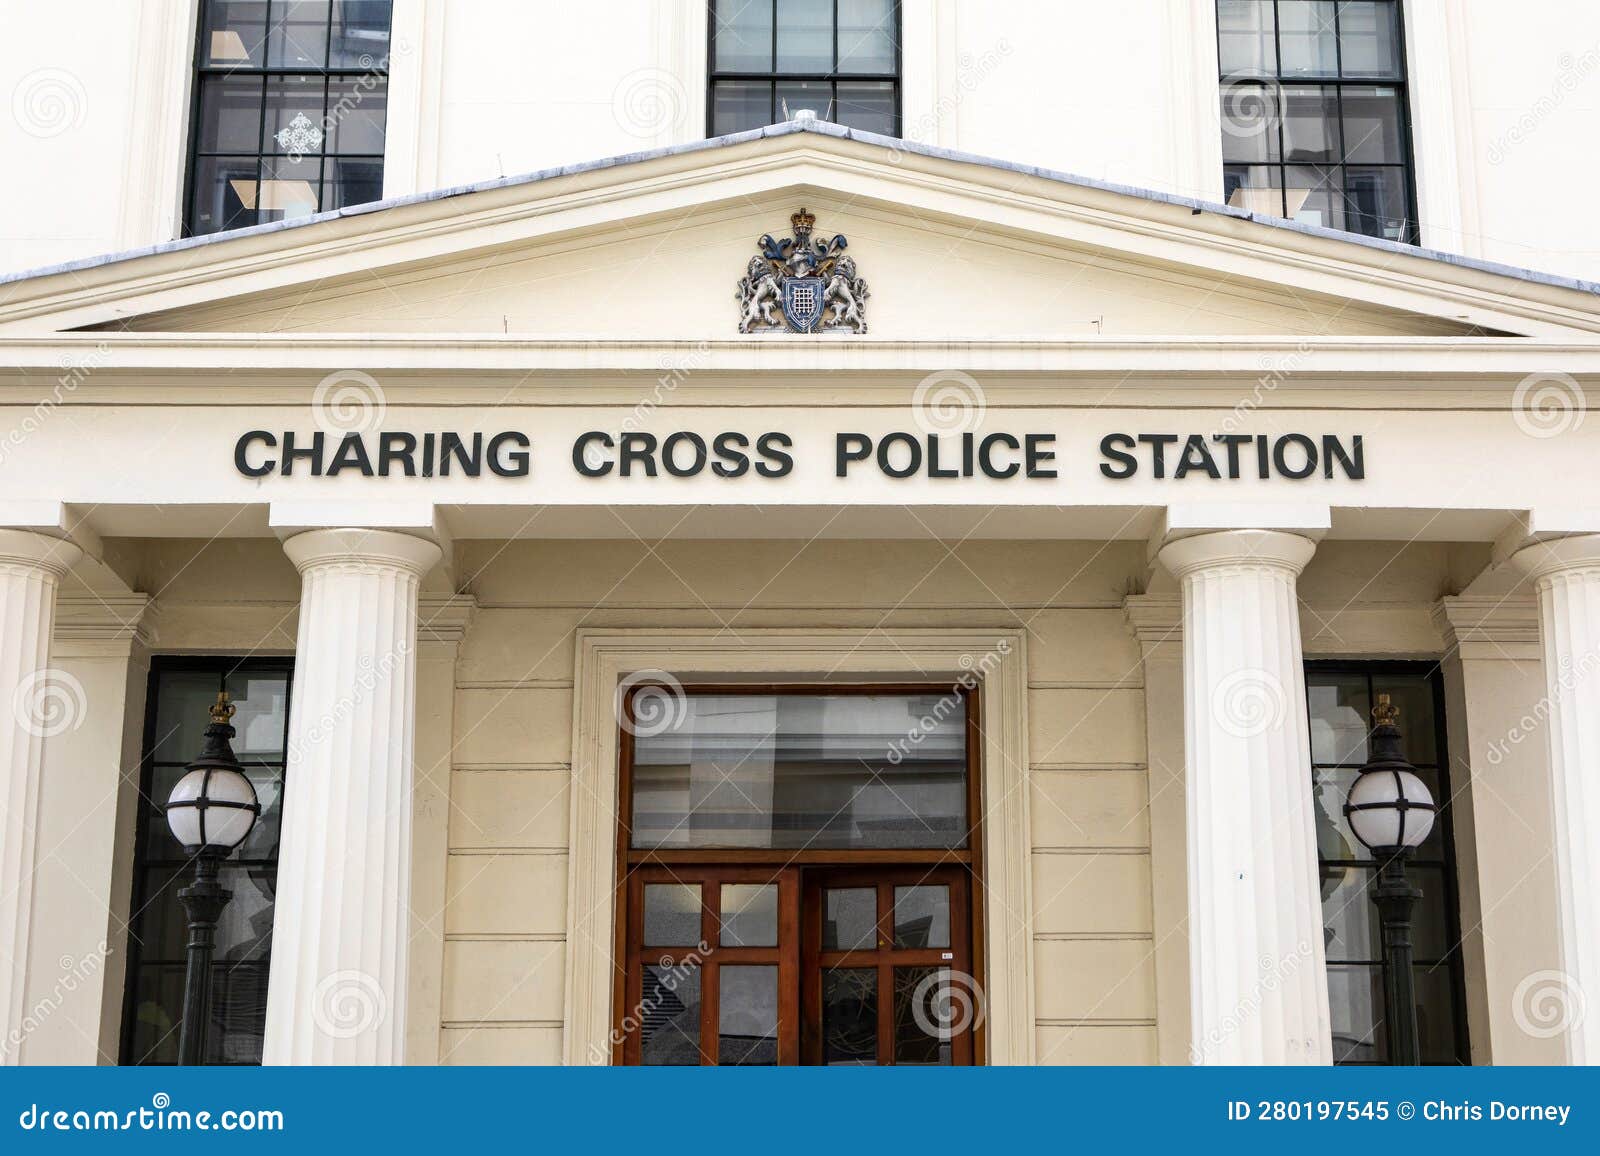 charing cross police phone number